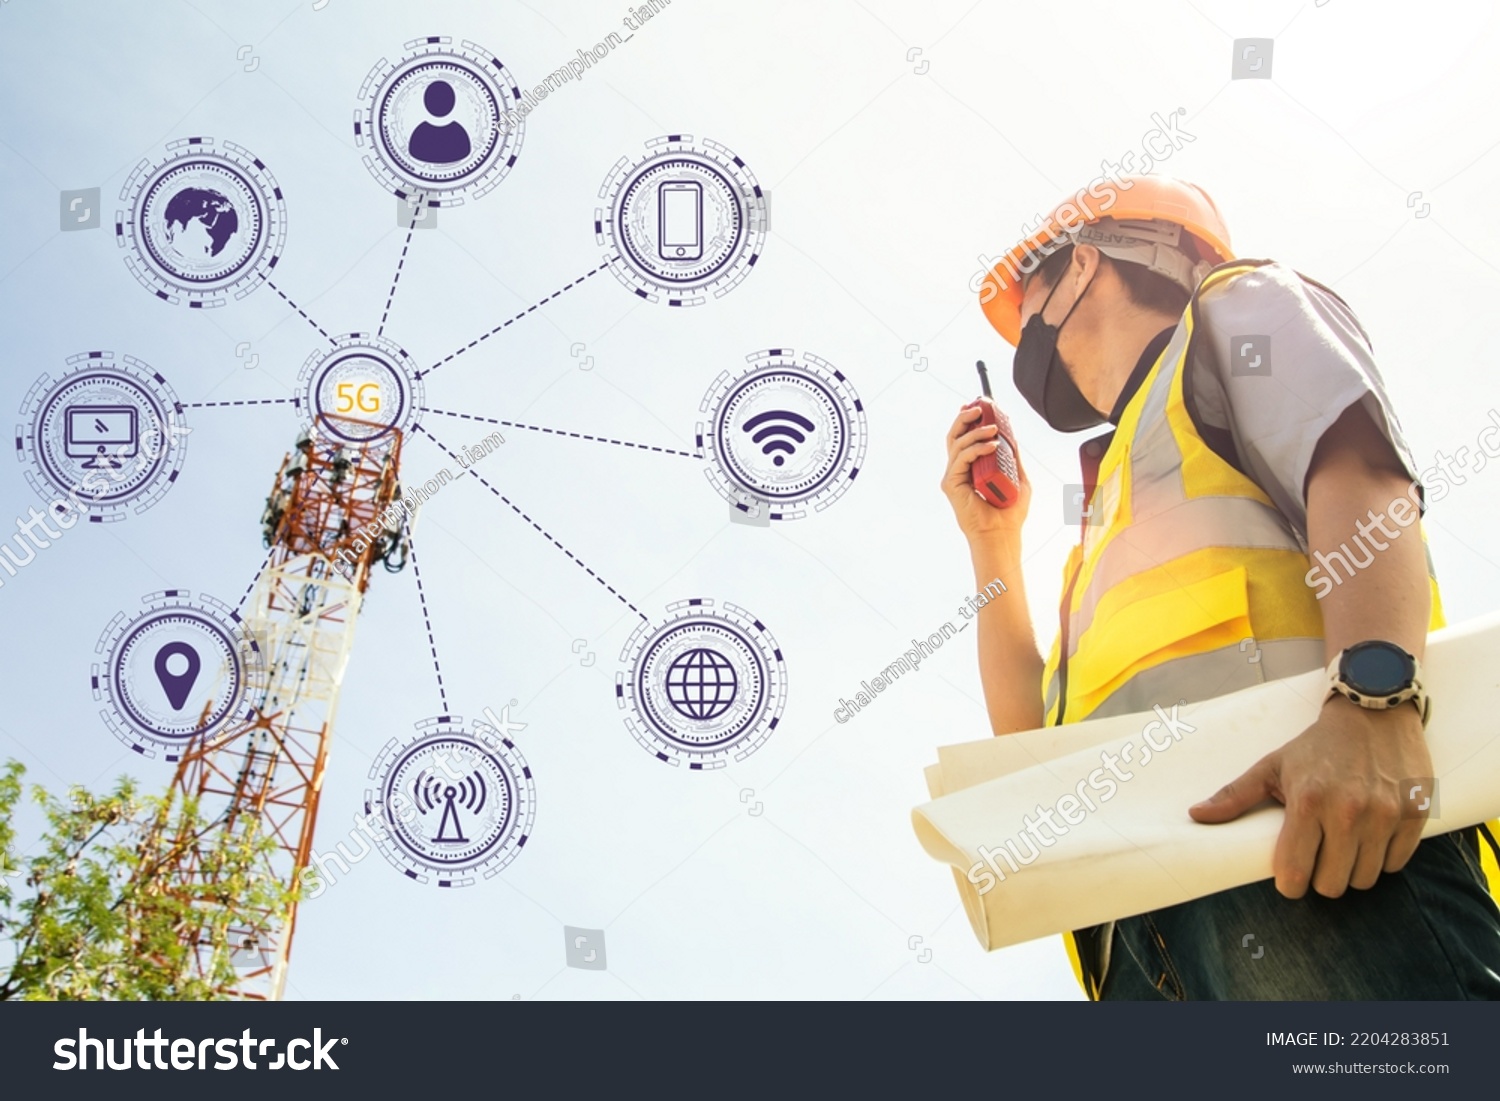 Team male architect engineers wearing masks helmets reporting on radio communications tower structure holds blueprints to monitor telecommunication signals, 5G networks internet data. #2204283851